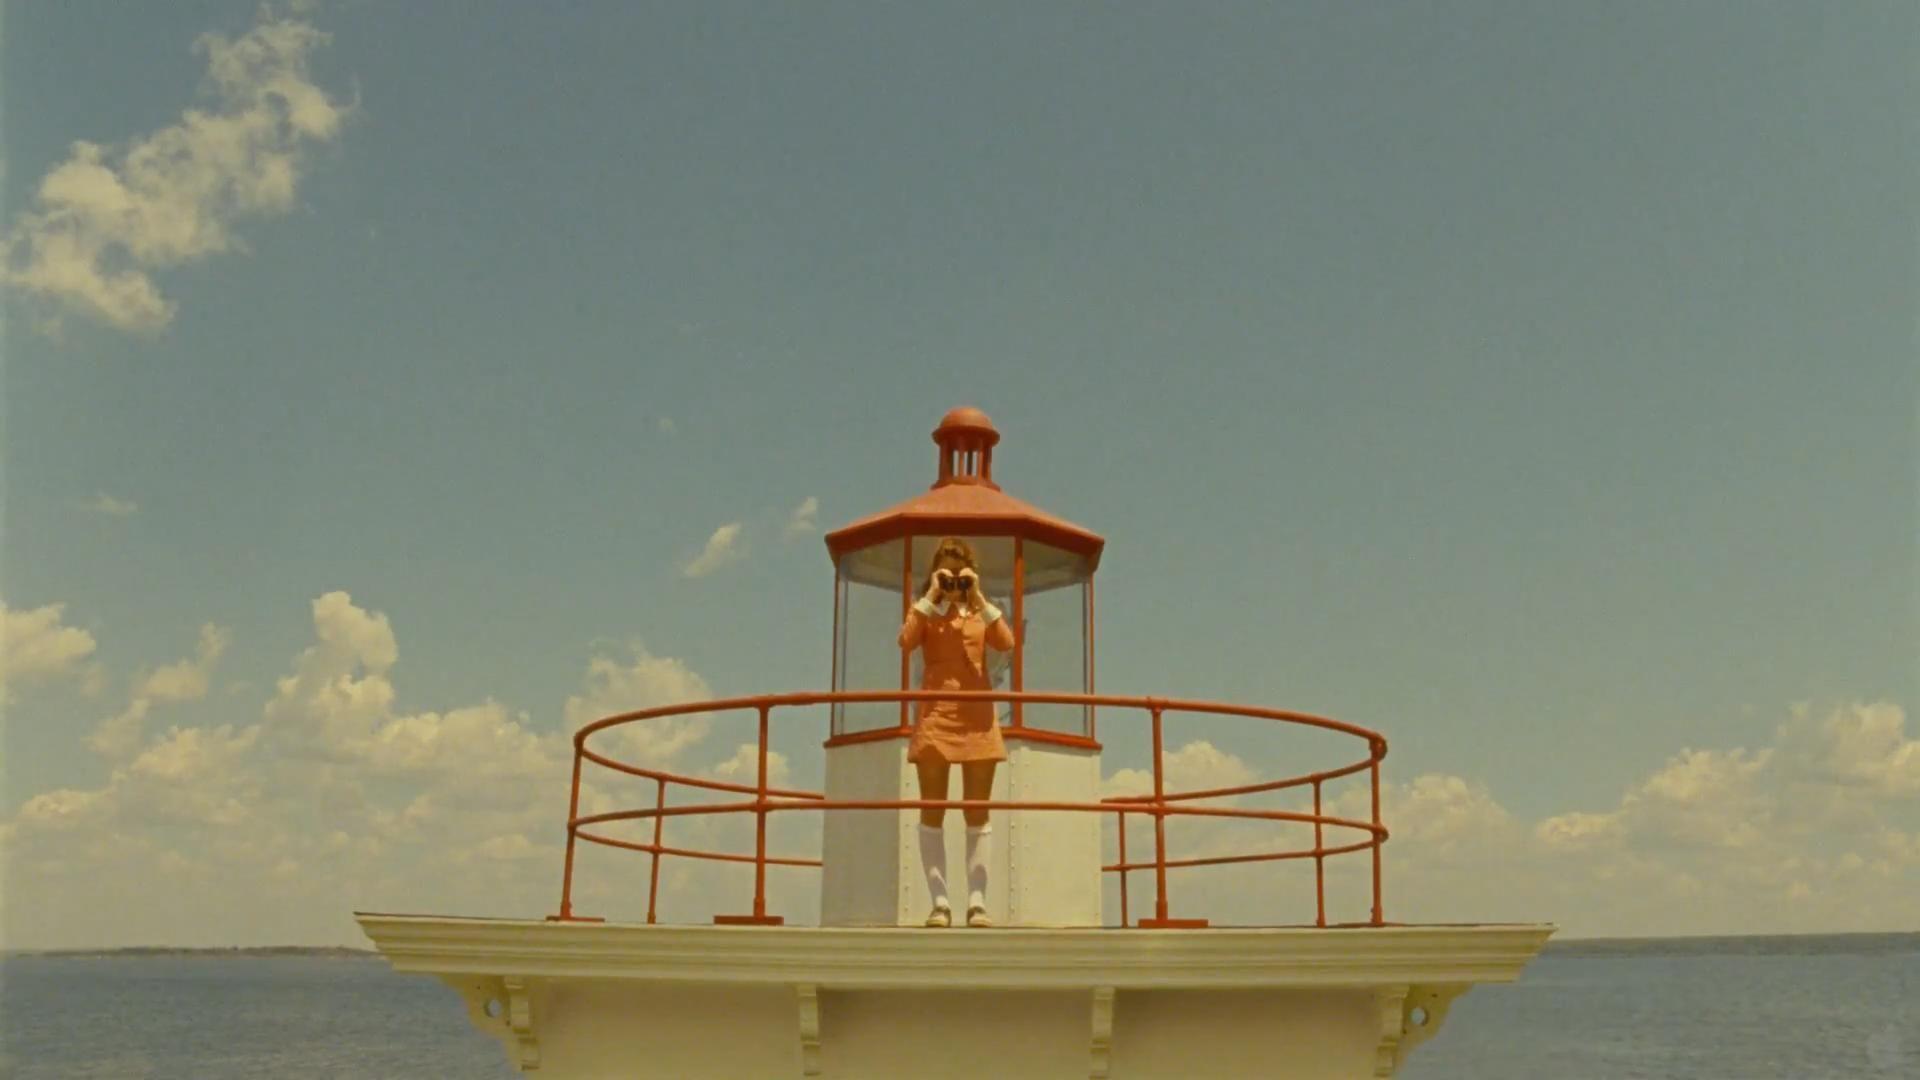 wallpaper wes anderson movies. Cine, Wes